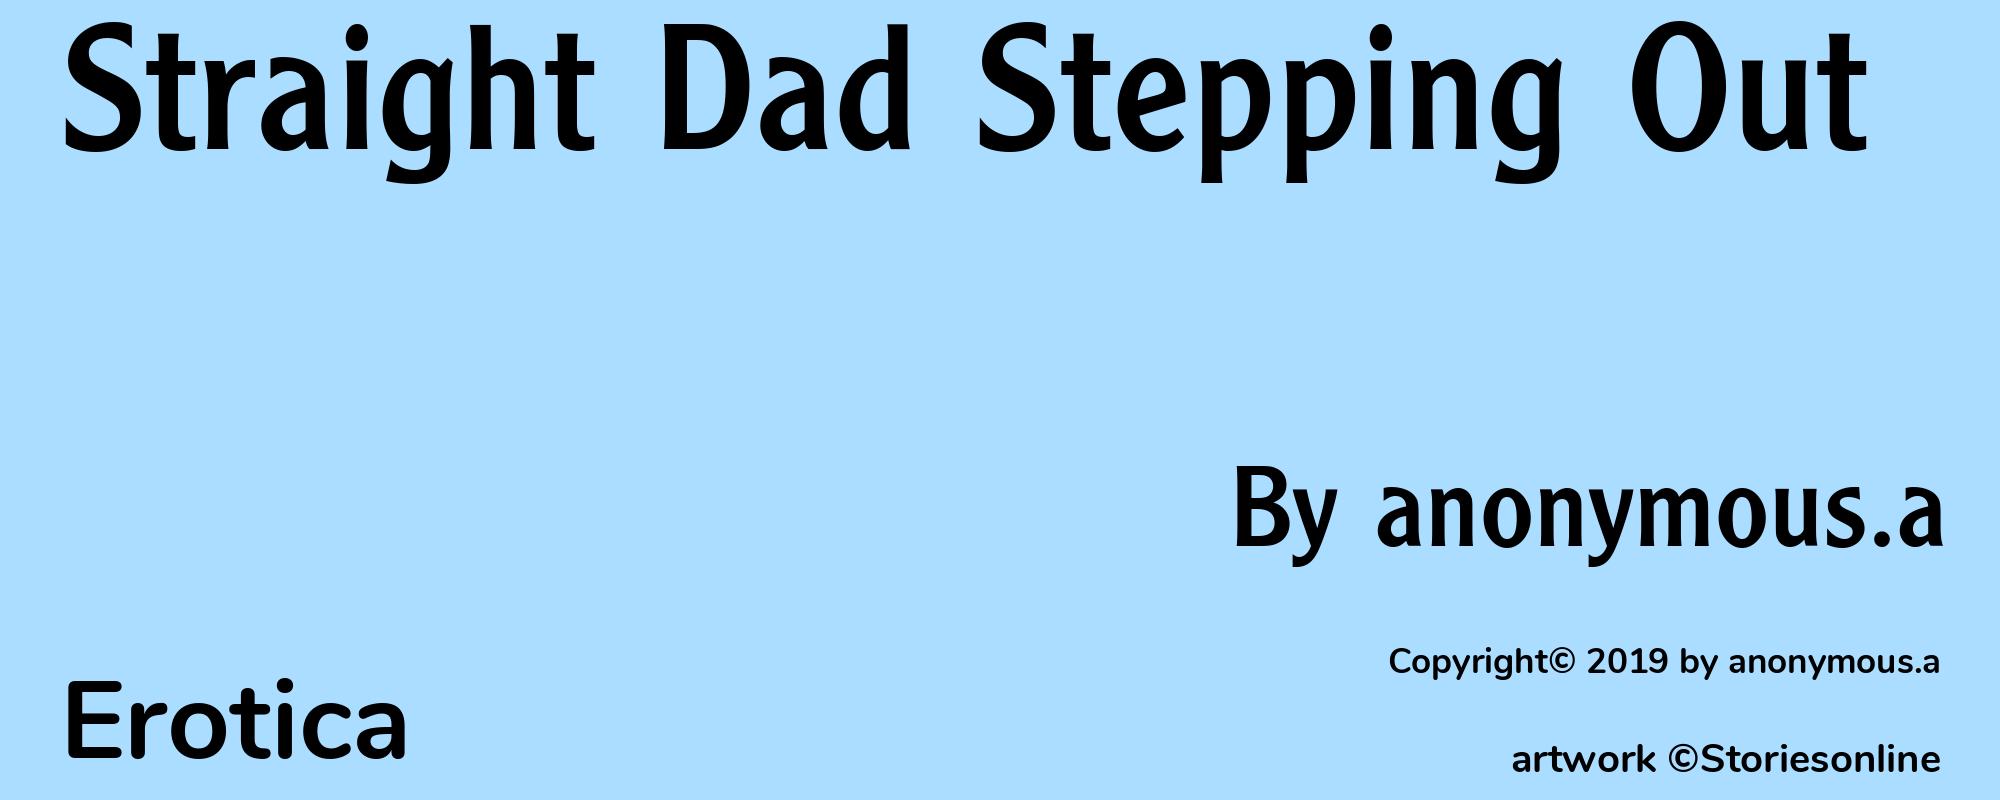 Straight Dad Stepping Out - Cover